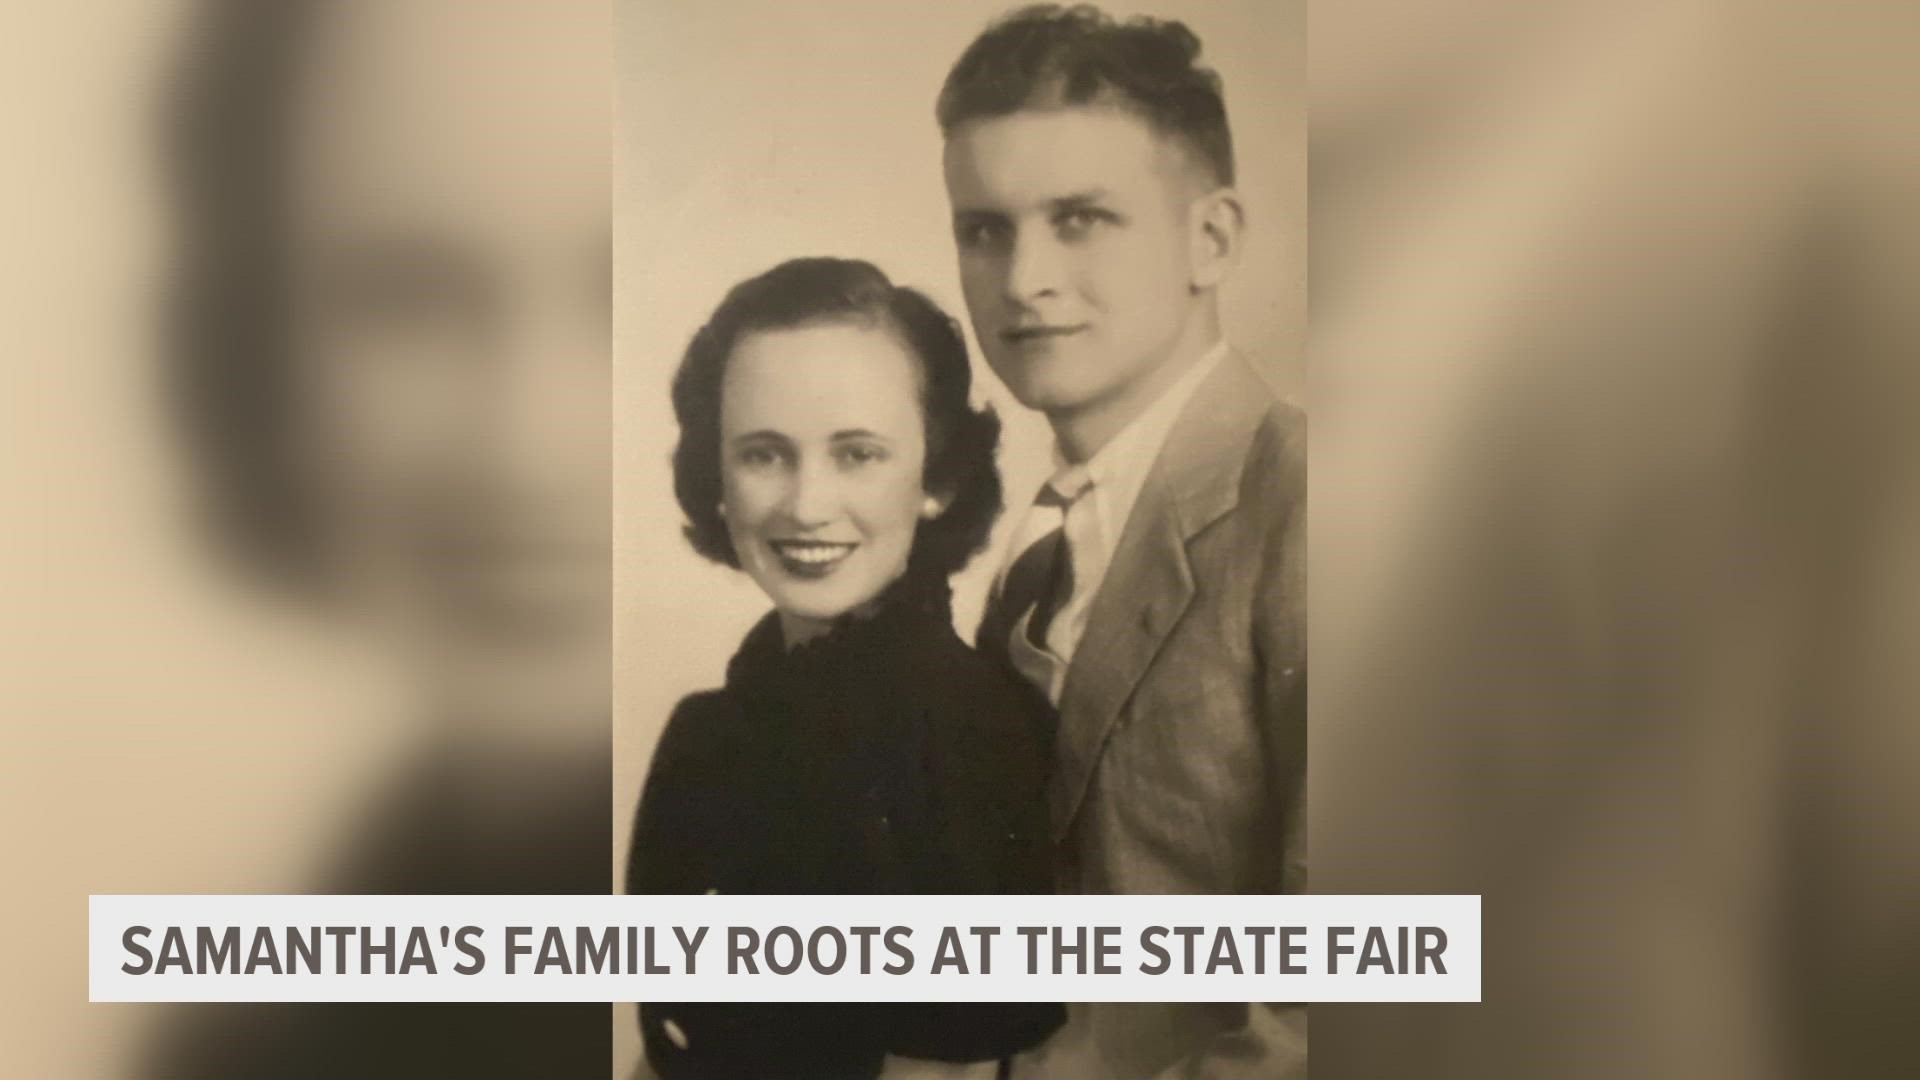 While 2022 is only the second year Mesa has attended the fair, her family history with the fair goes way back: her great-grandparents actually met at the fair.